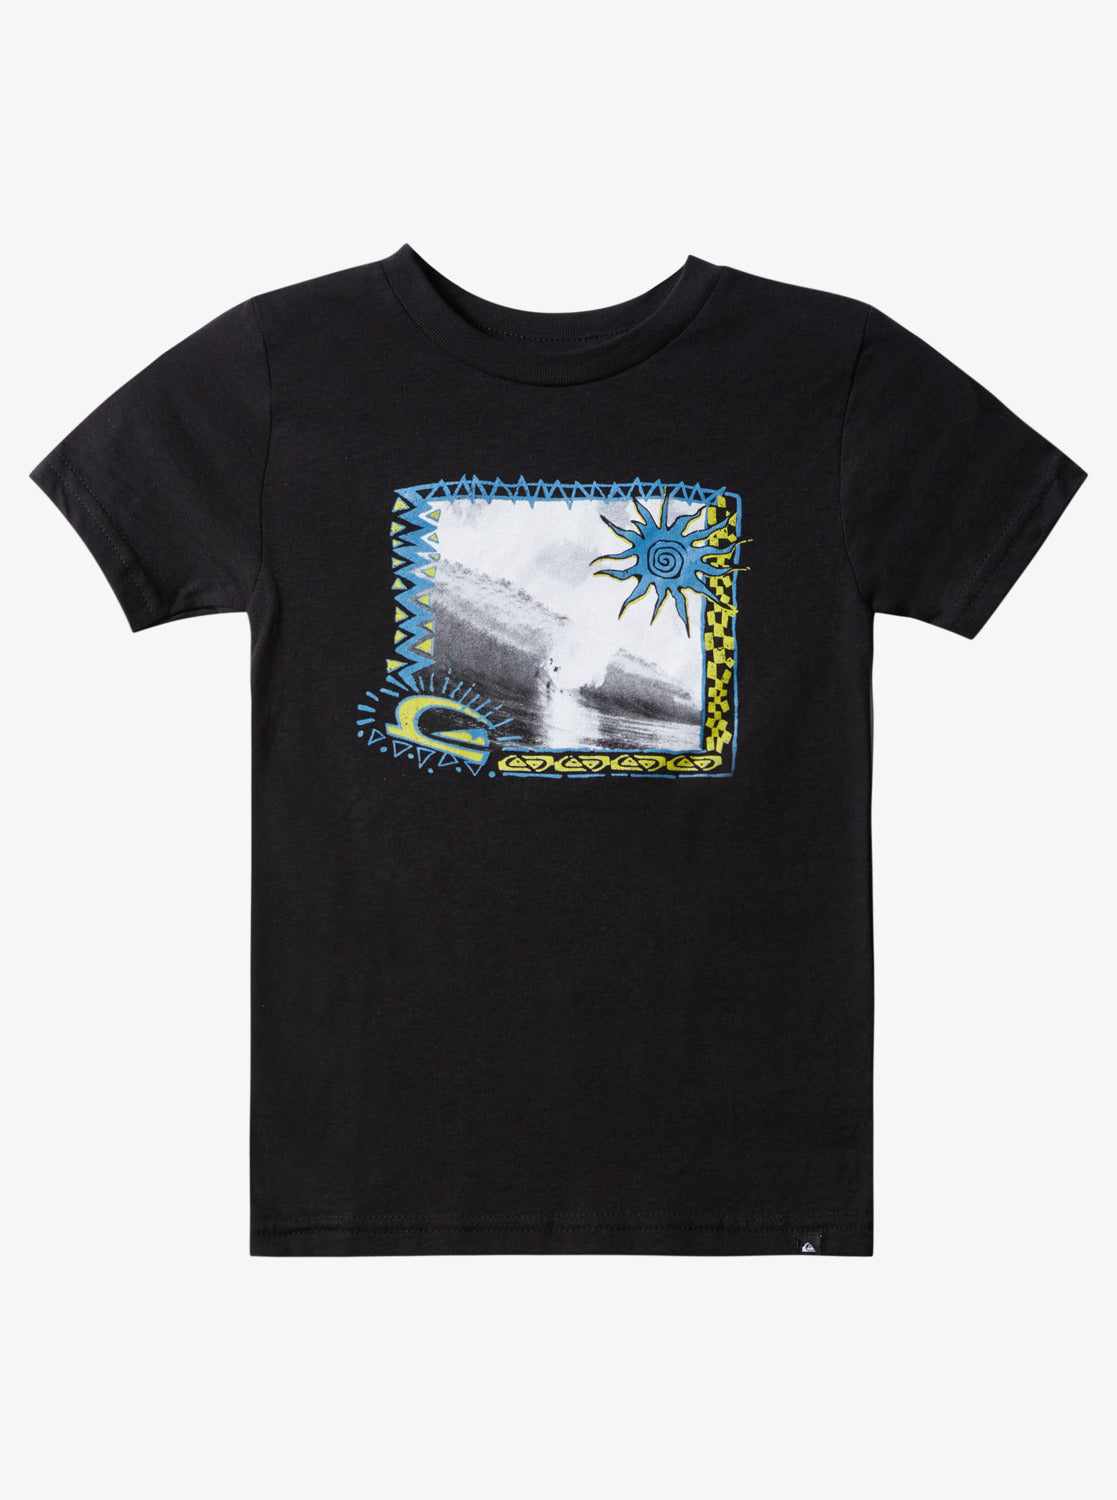 Quiksilver Boys Easy Way Out SS Tee BYHH XL/16